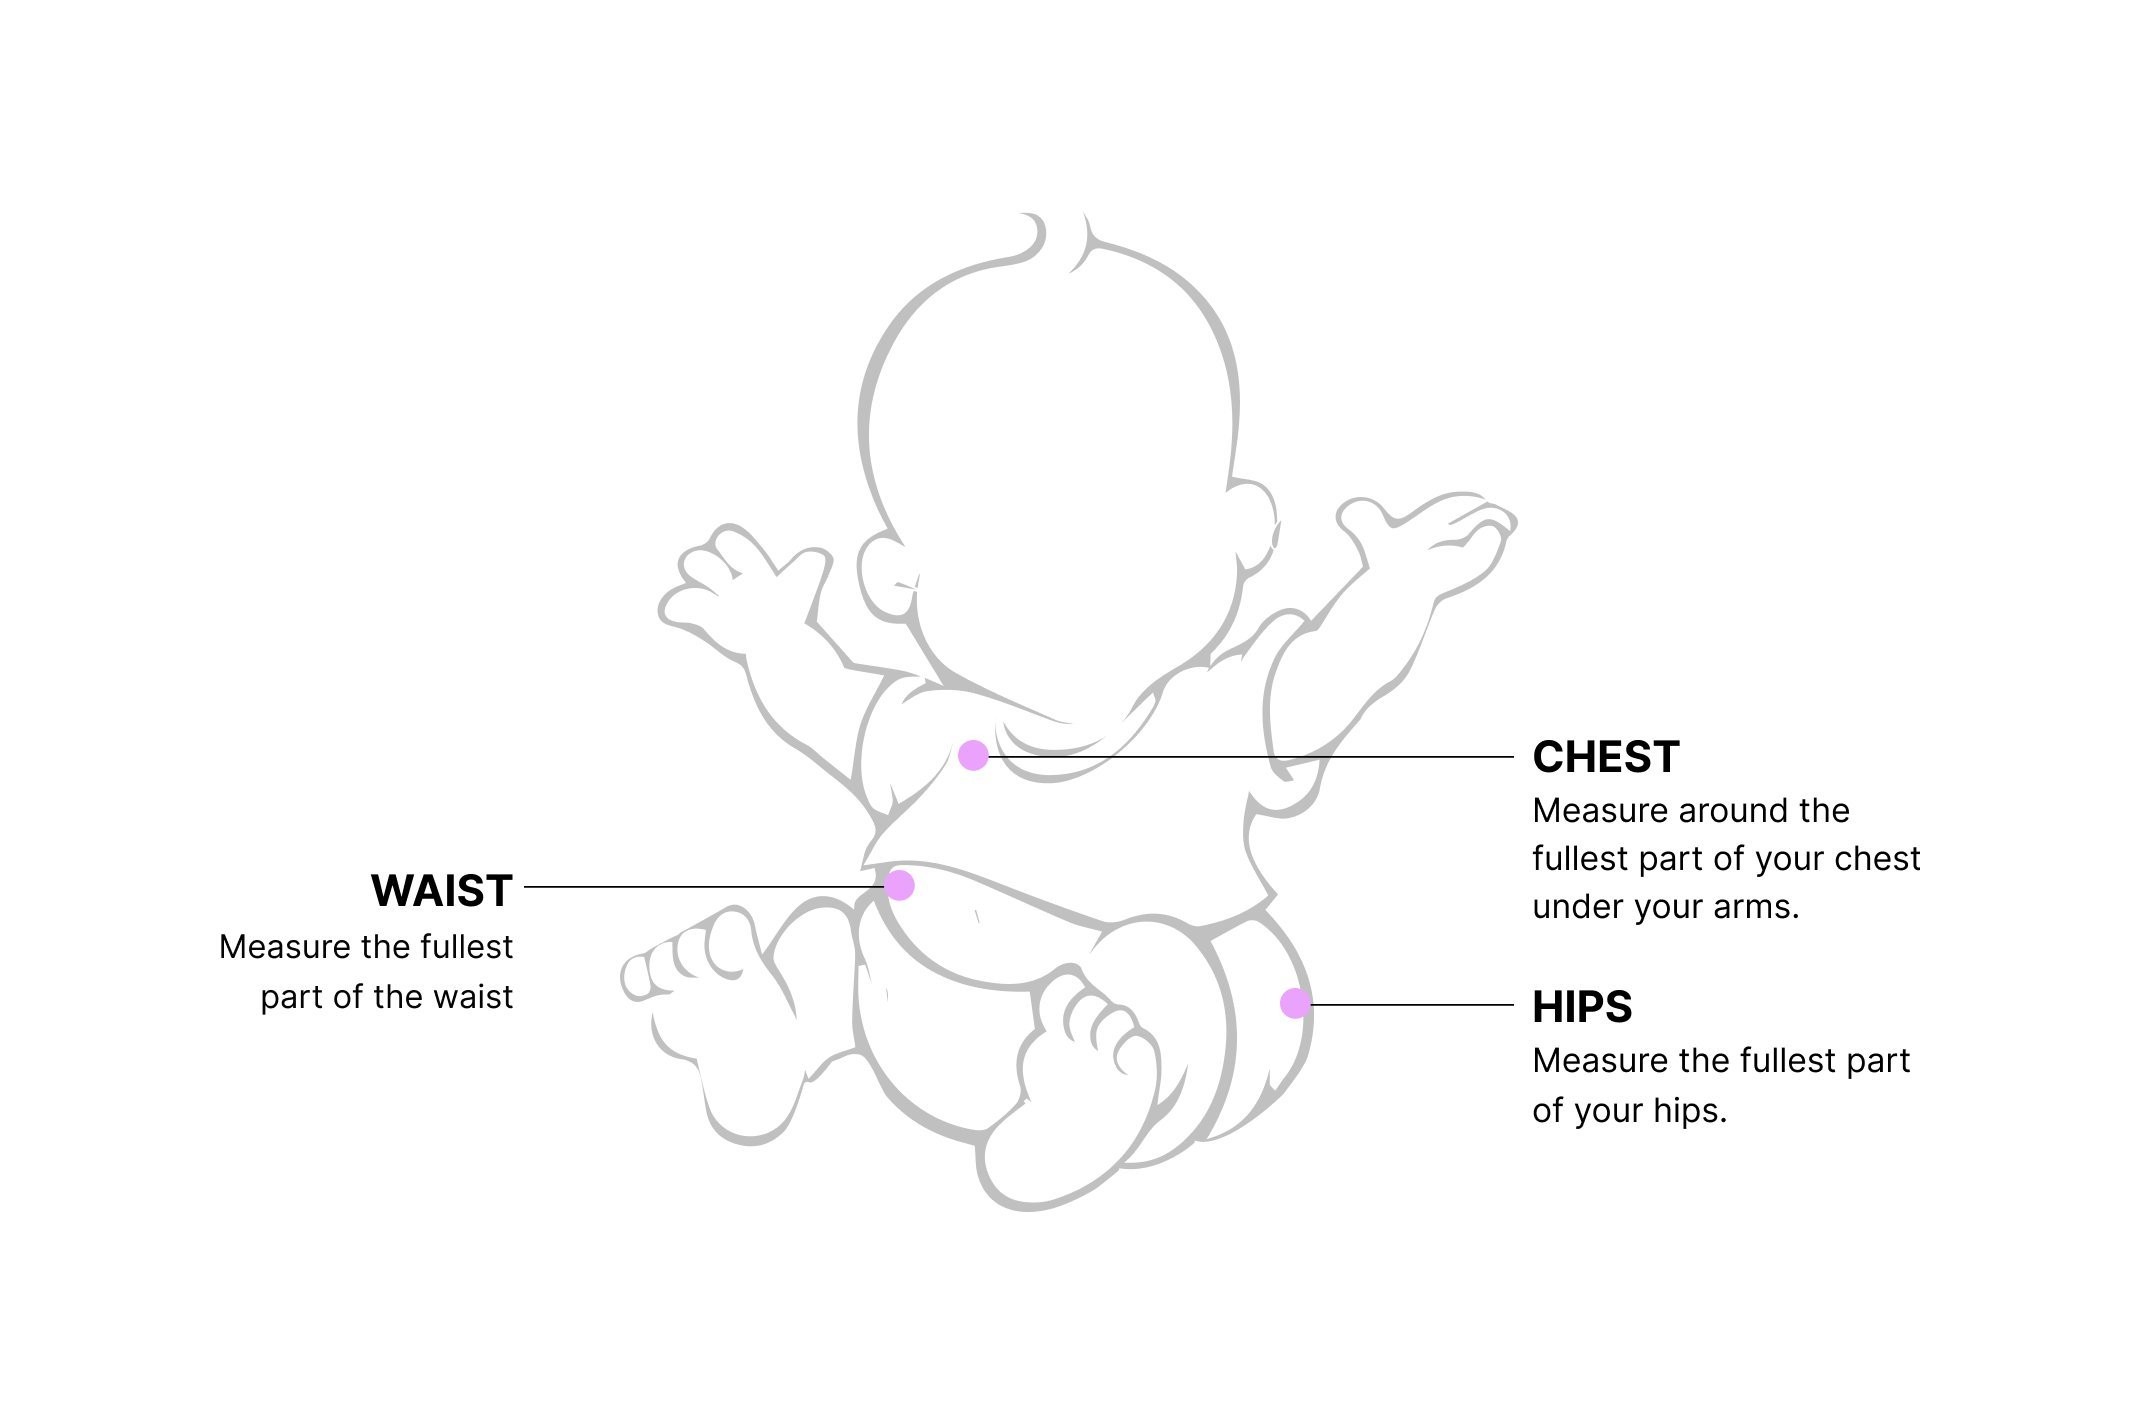 Illustration of a model showing types of fits with marked points for chest, hips and waist